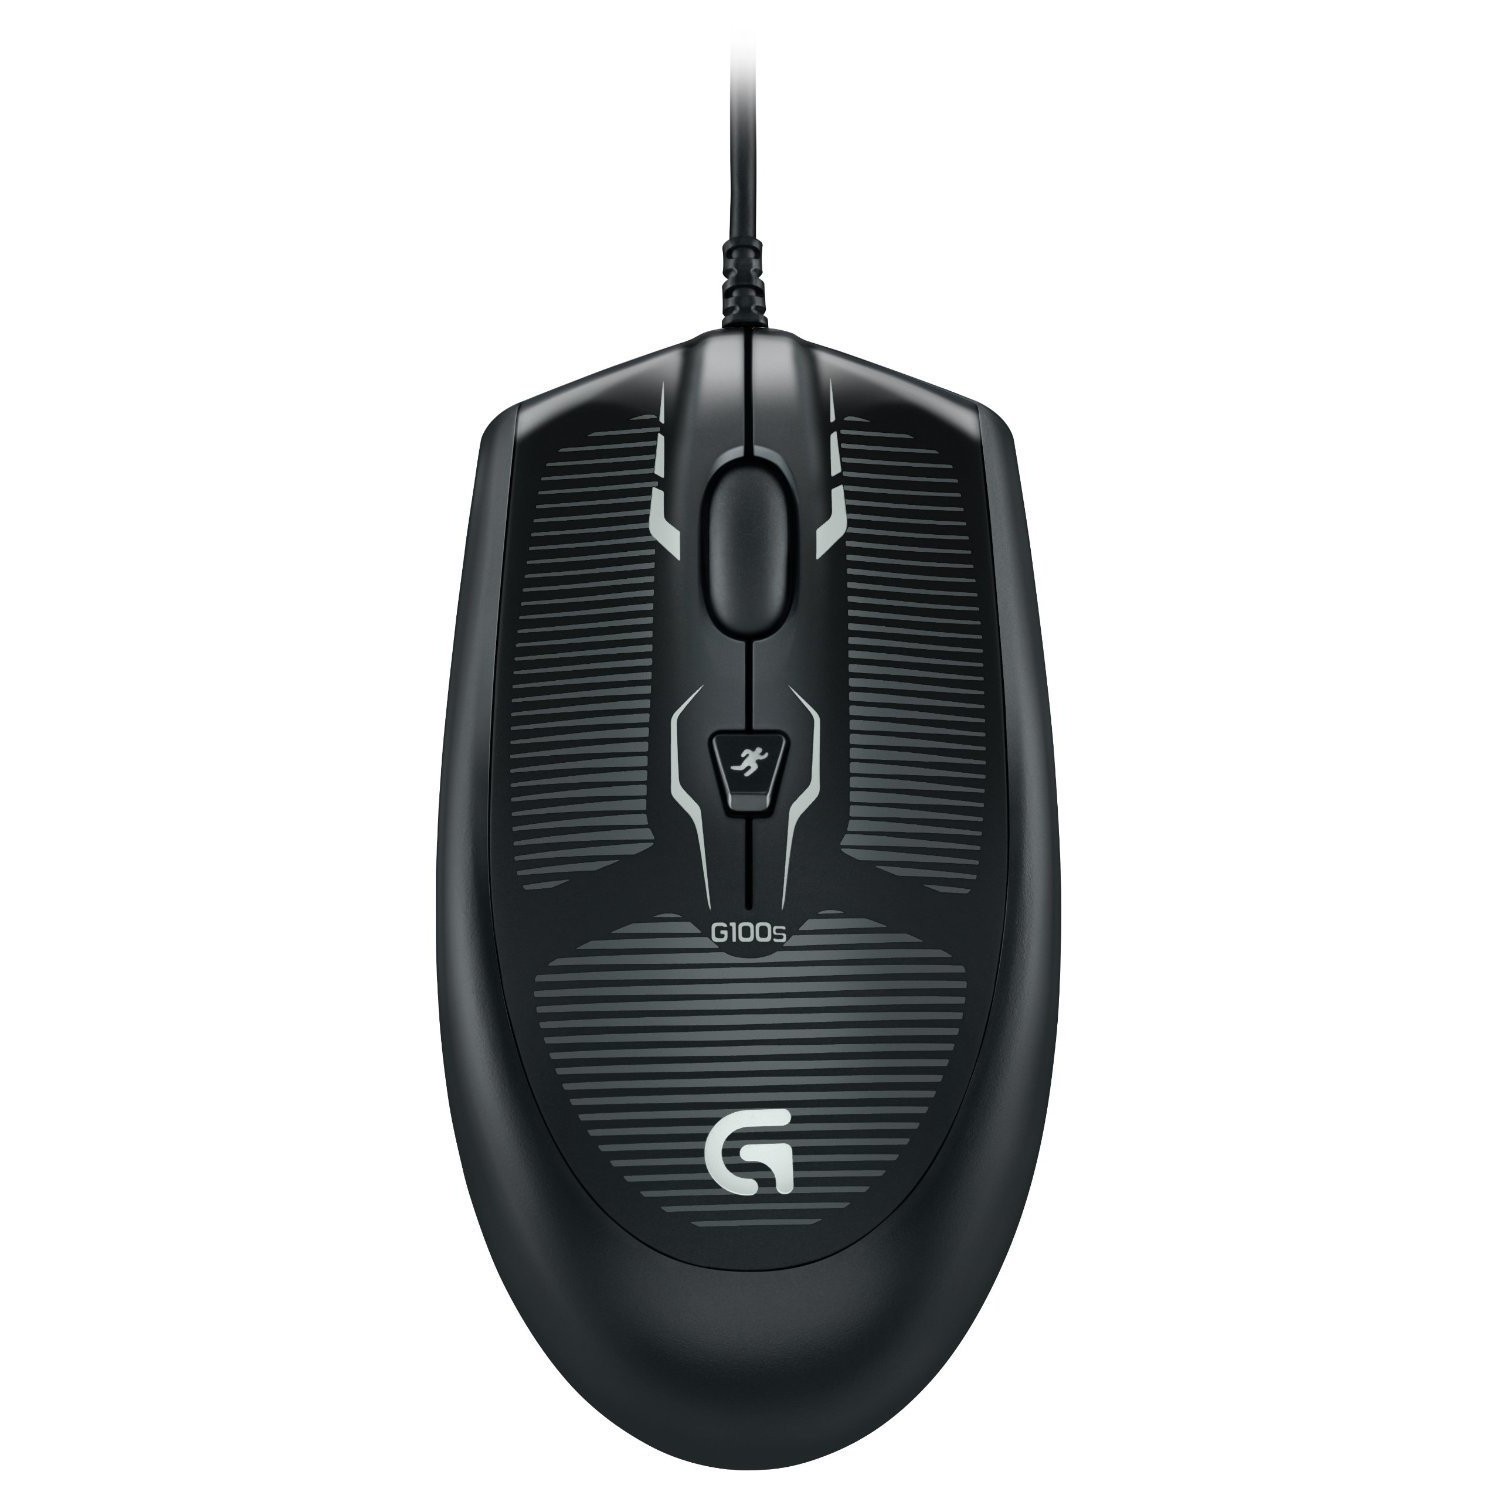 Logitech G100s Gaming Mouse-2